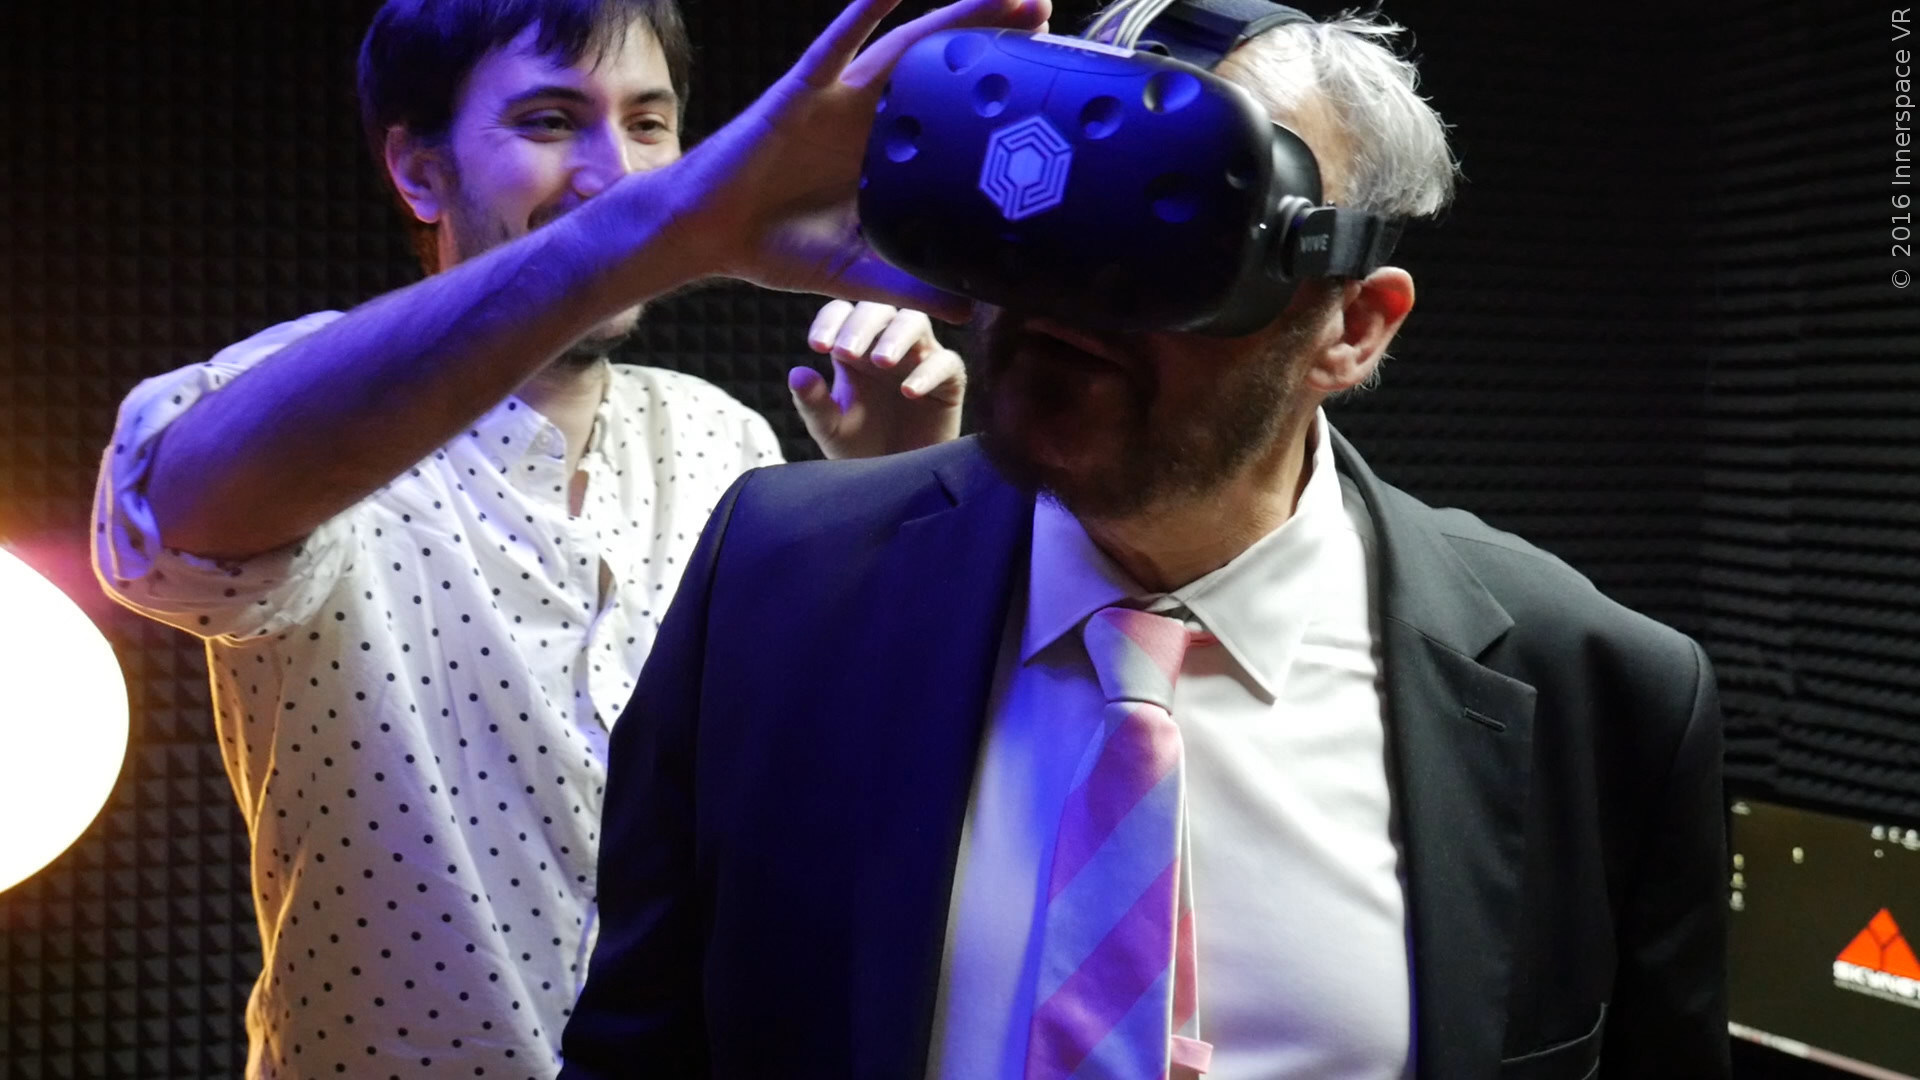 John Rhys-Davies in Virtual Reality with Innerspace VR wearing the HTC VIVE headset.